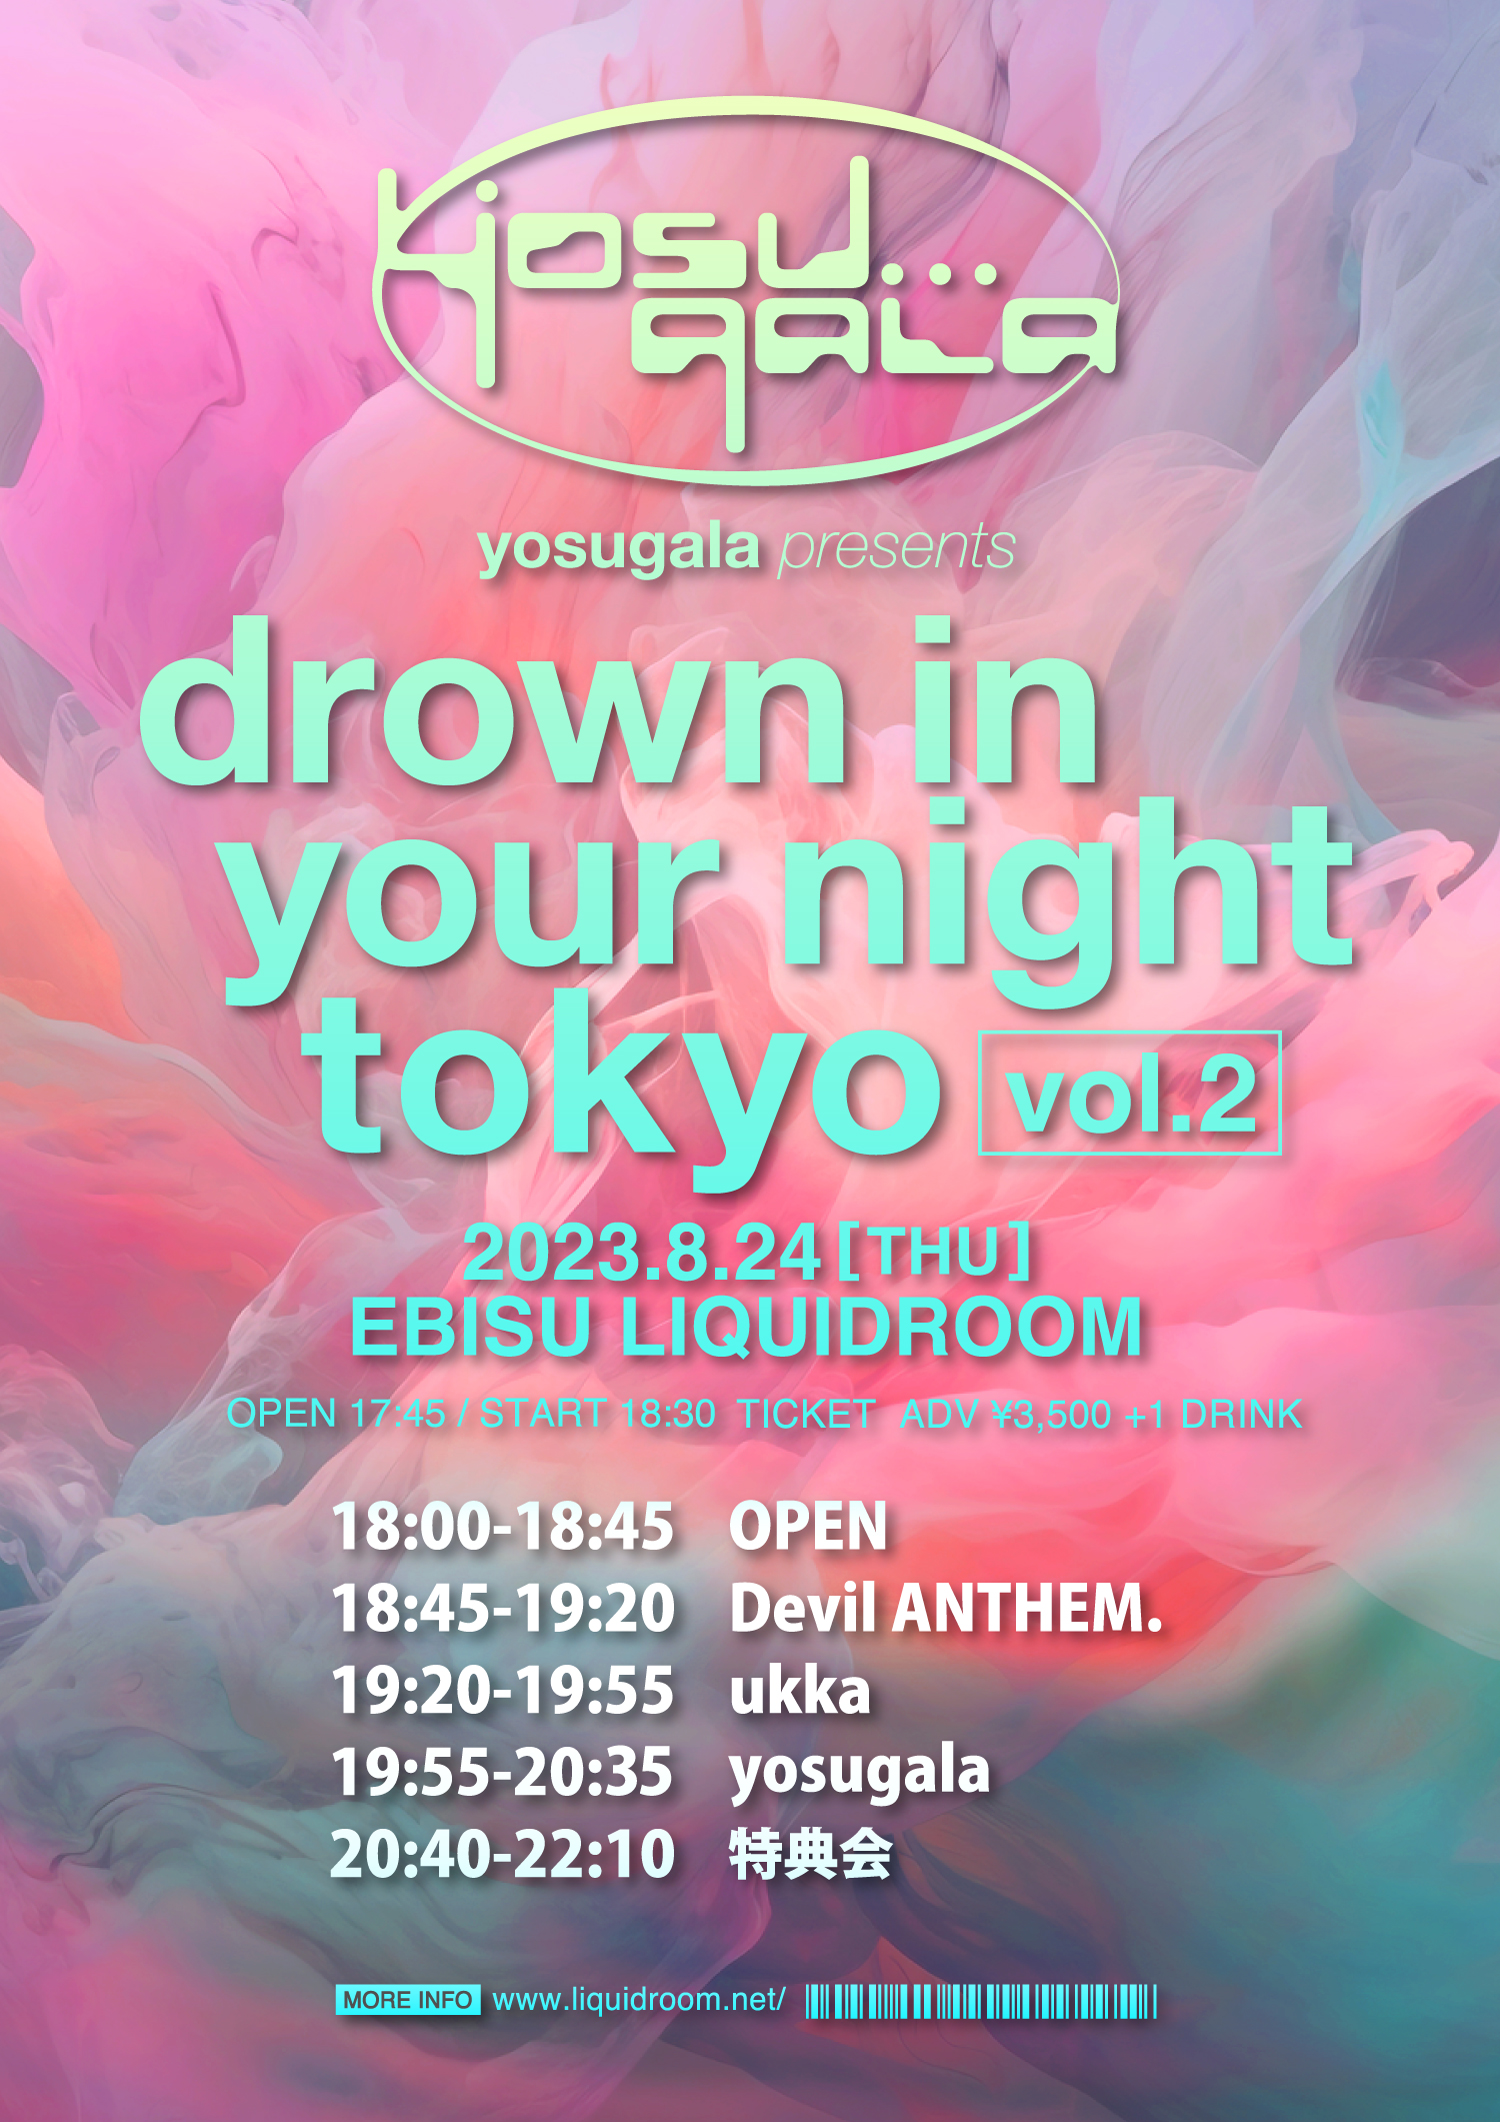 drown in your night tokyo vol.2